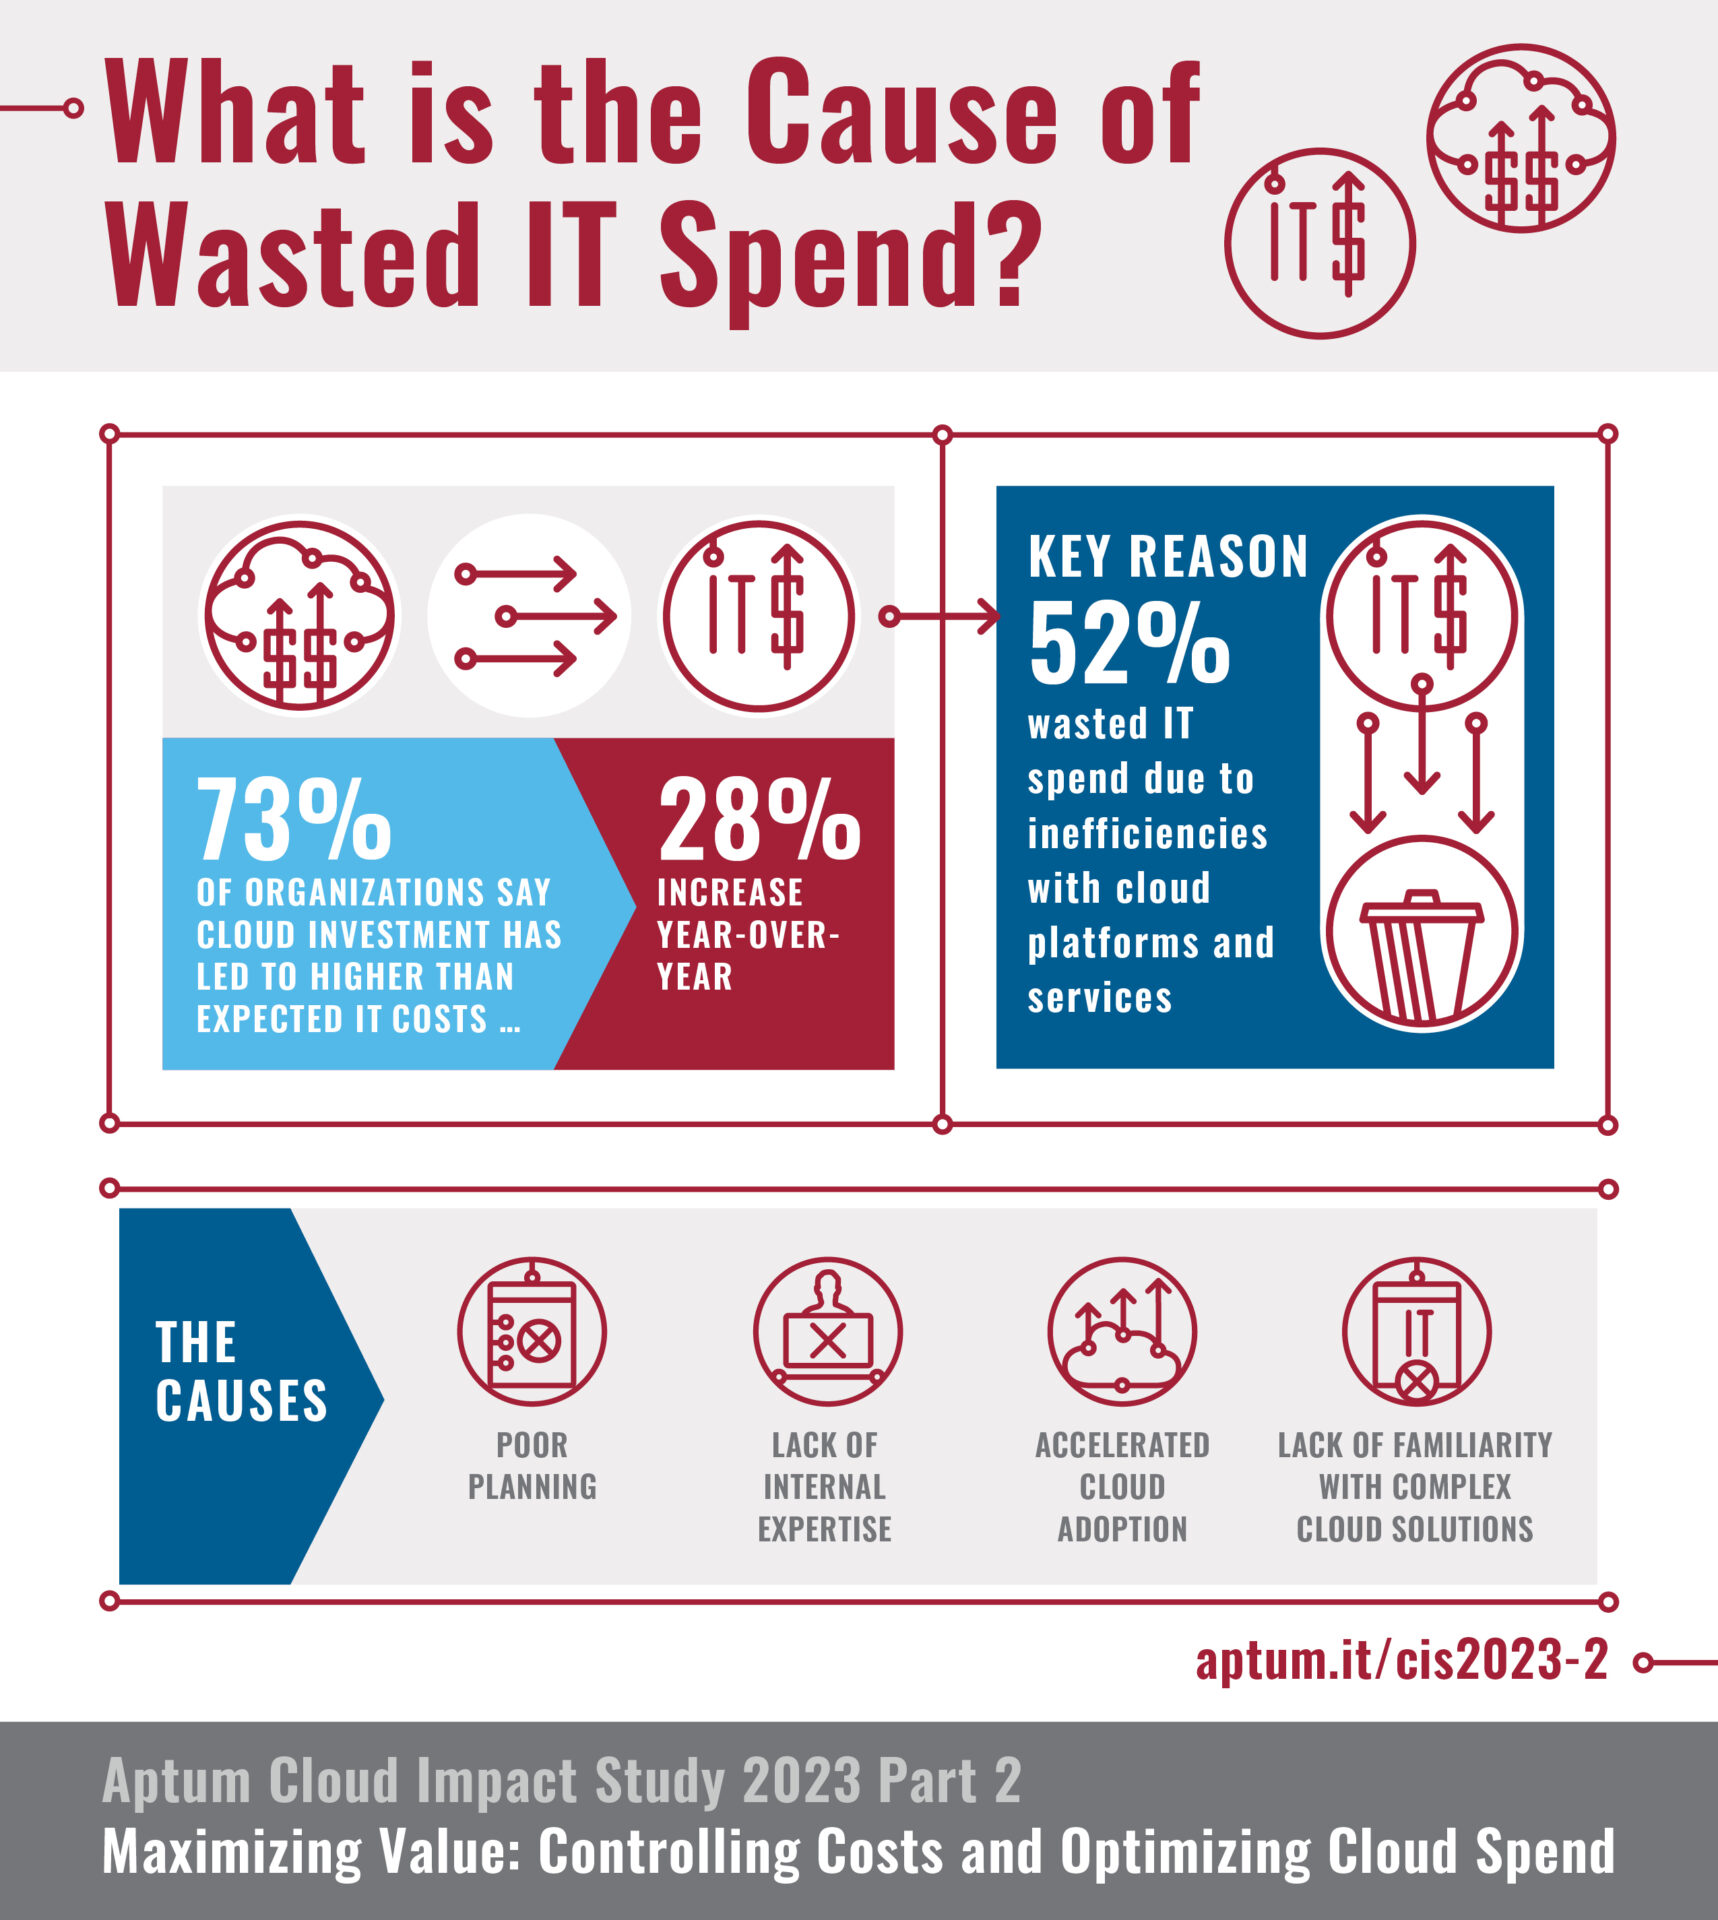 reasons for wasted IT spend